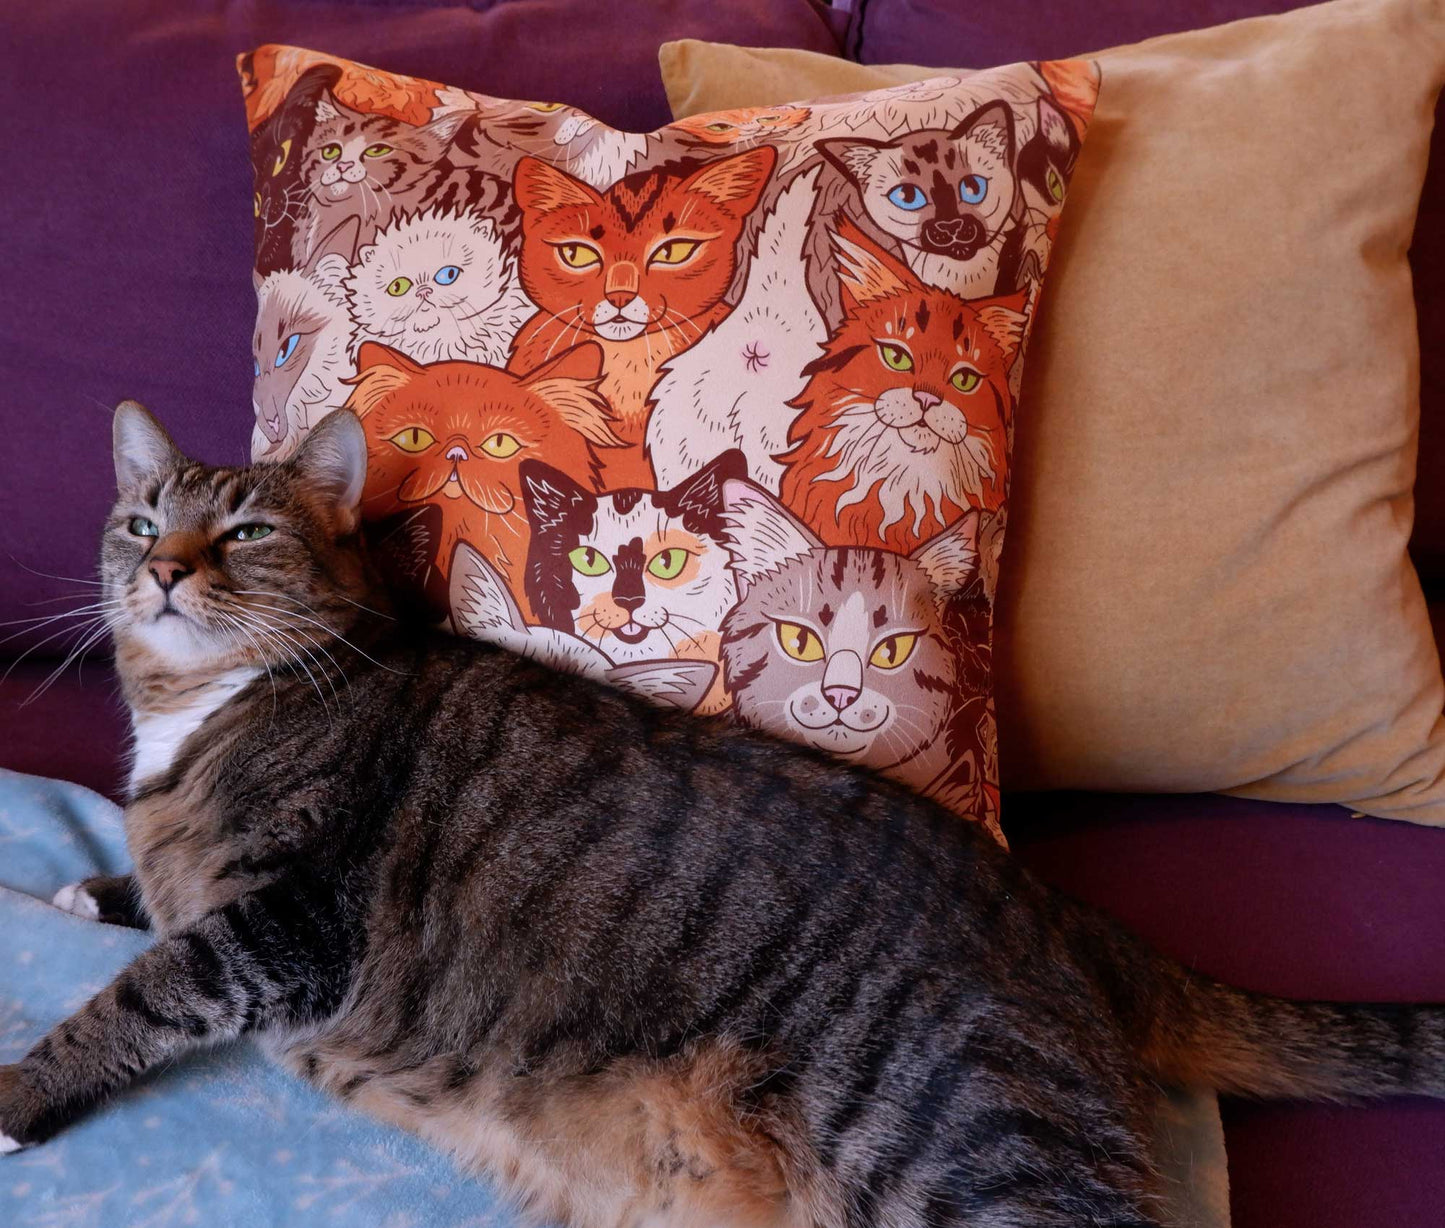 Clutter of Cats - Decor Pillow Cover